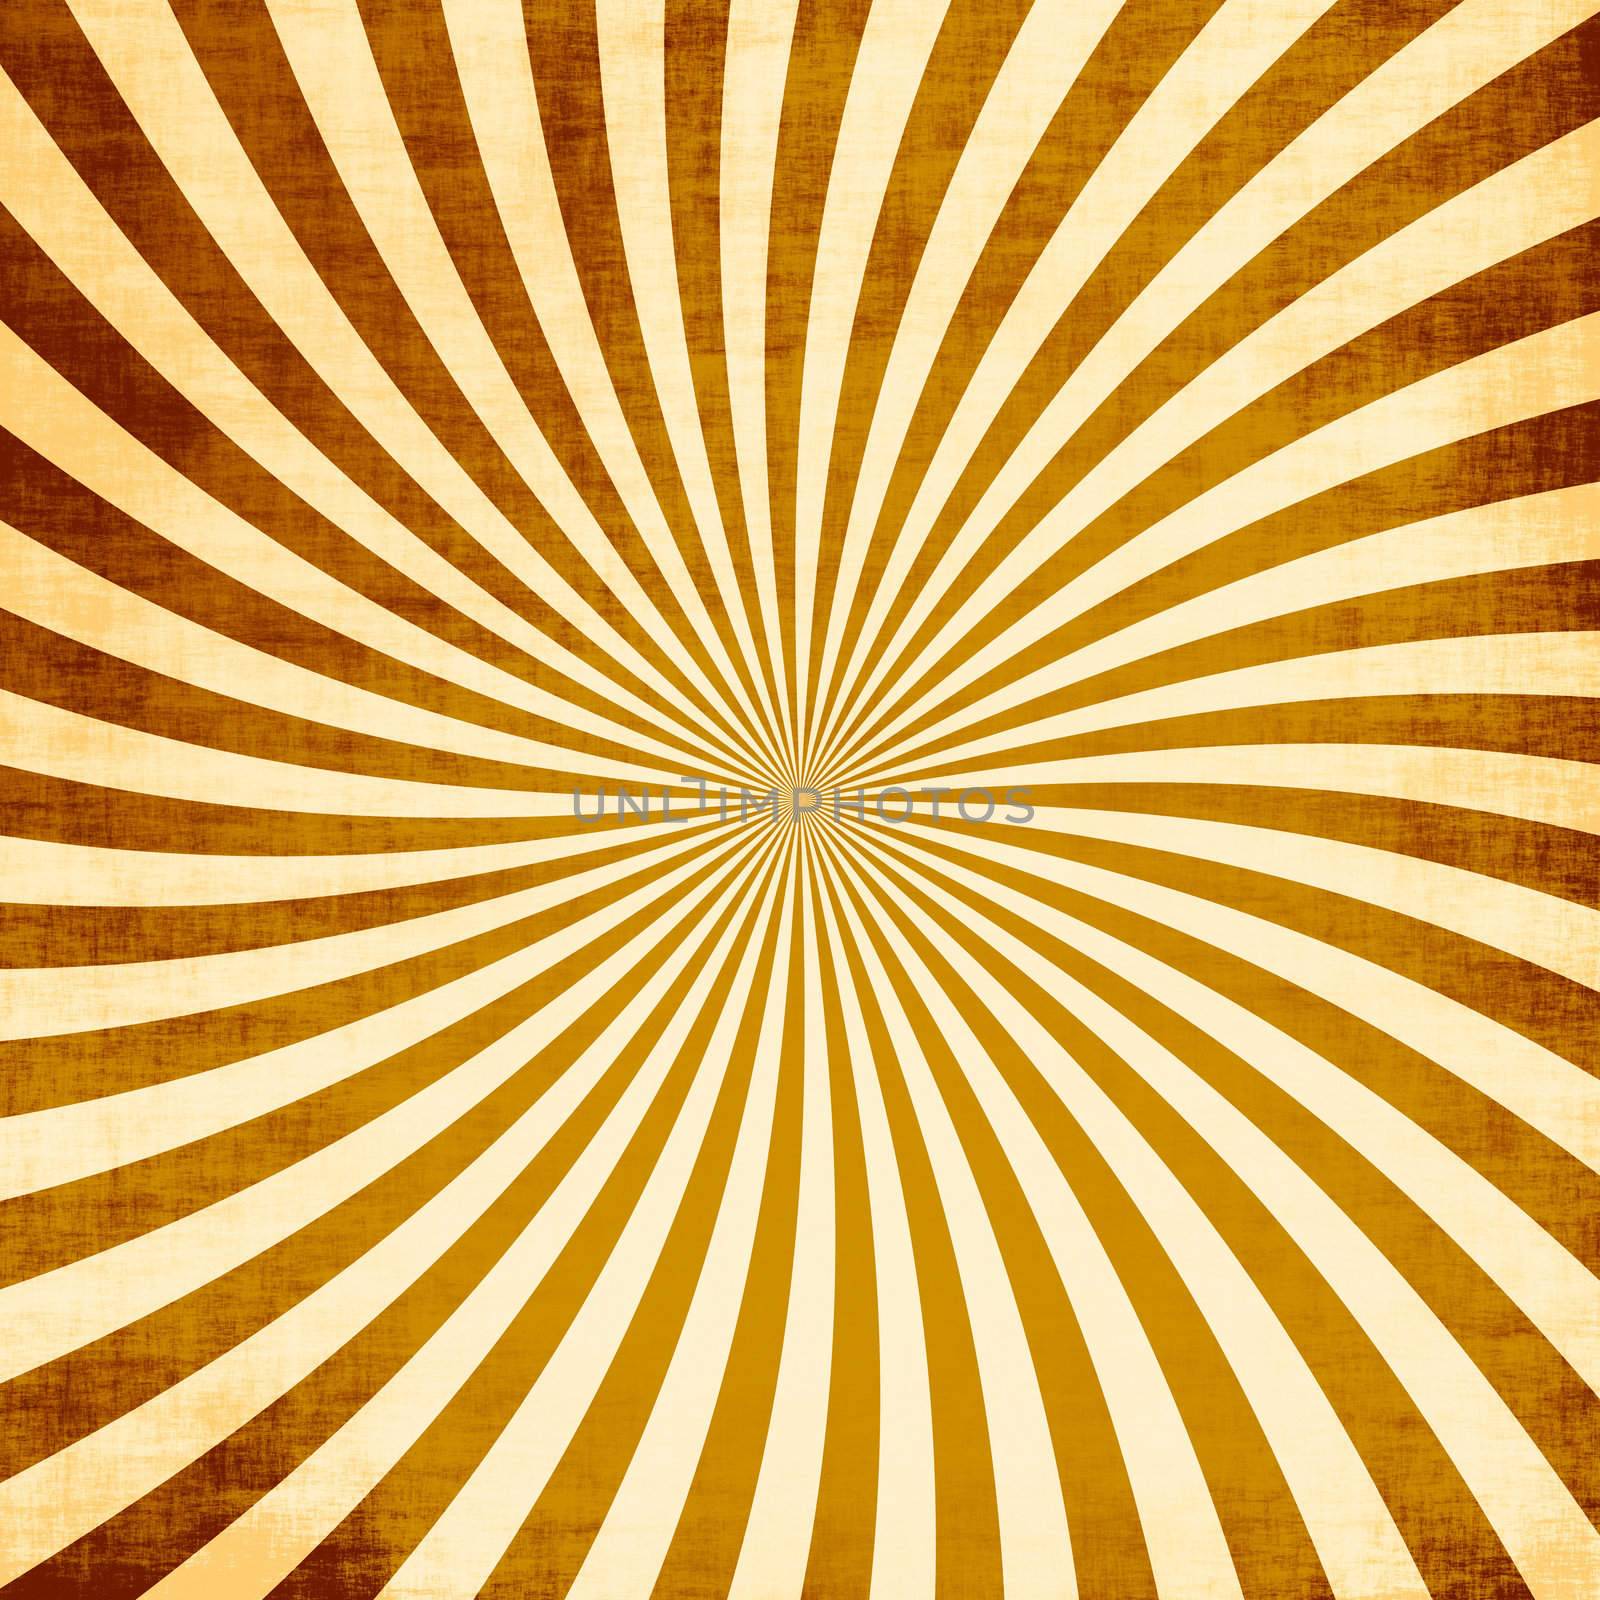 A retro or vintage looking rays pattern that works great as a background or backdrop.